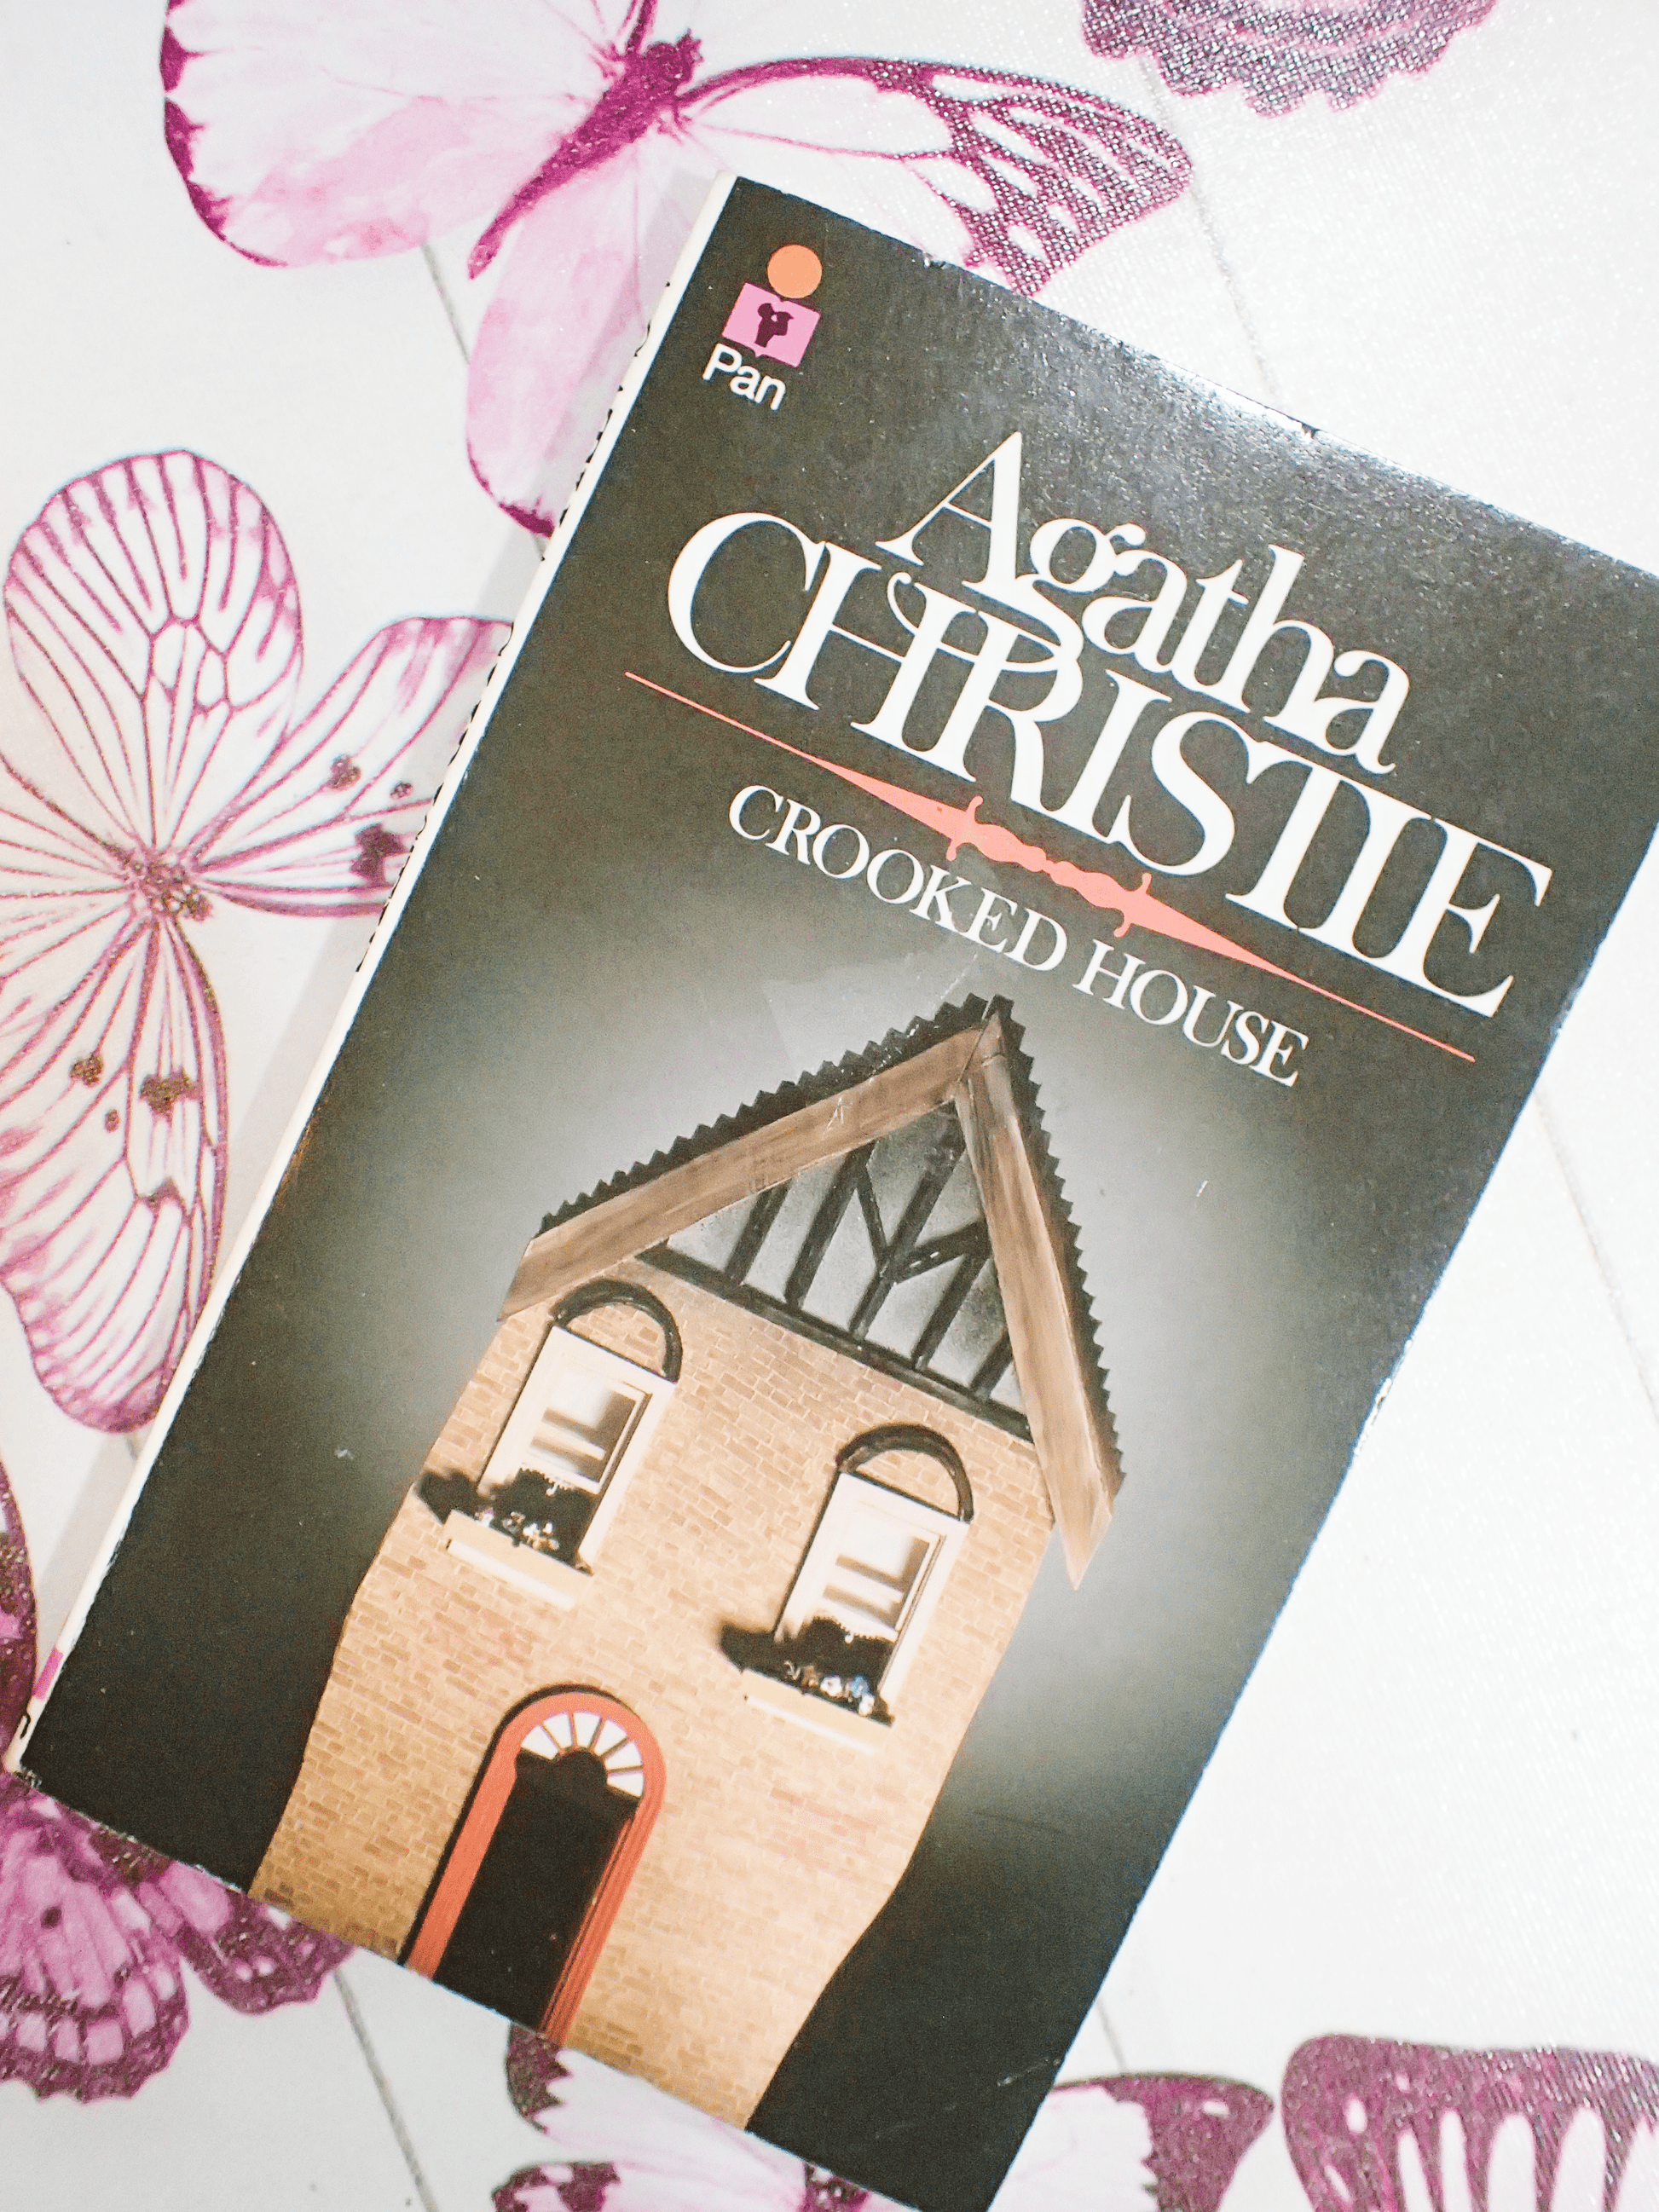 Front cover of Vintage Pan Paperback Agatha Christie 'Crooked House' showing a charming crooked red brick house against a dark cover.